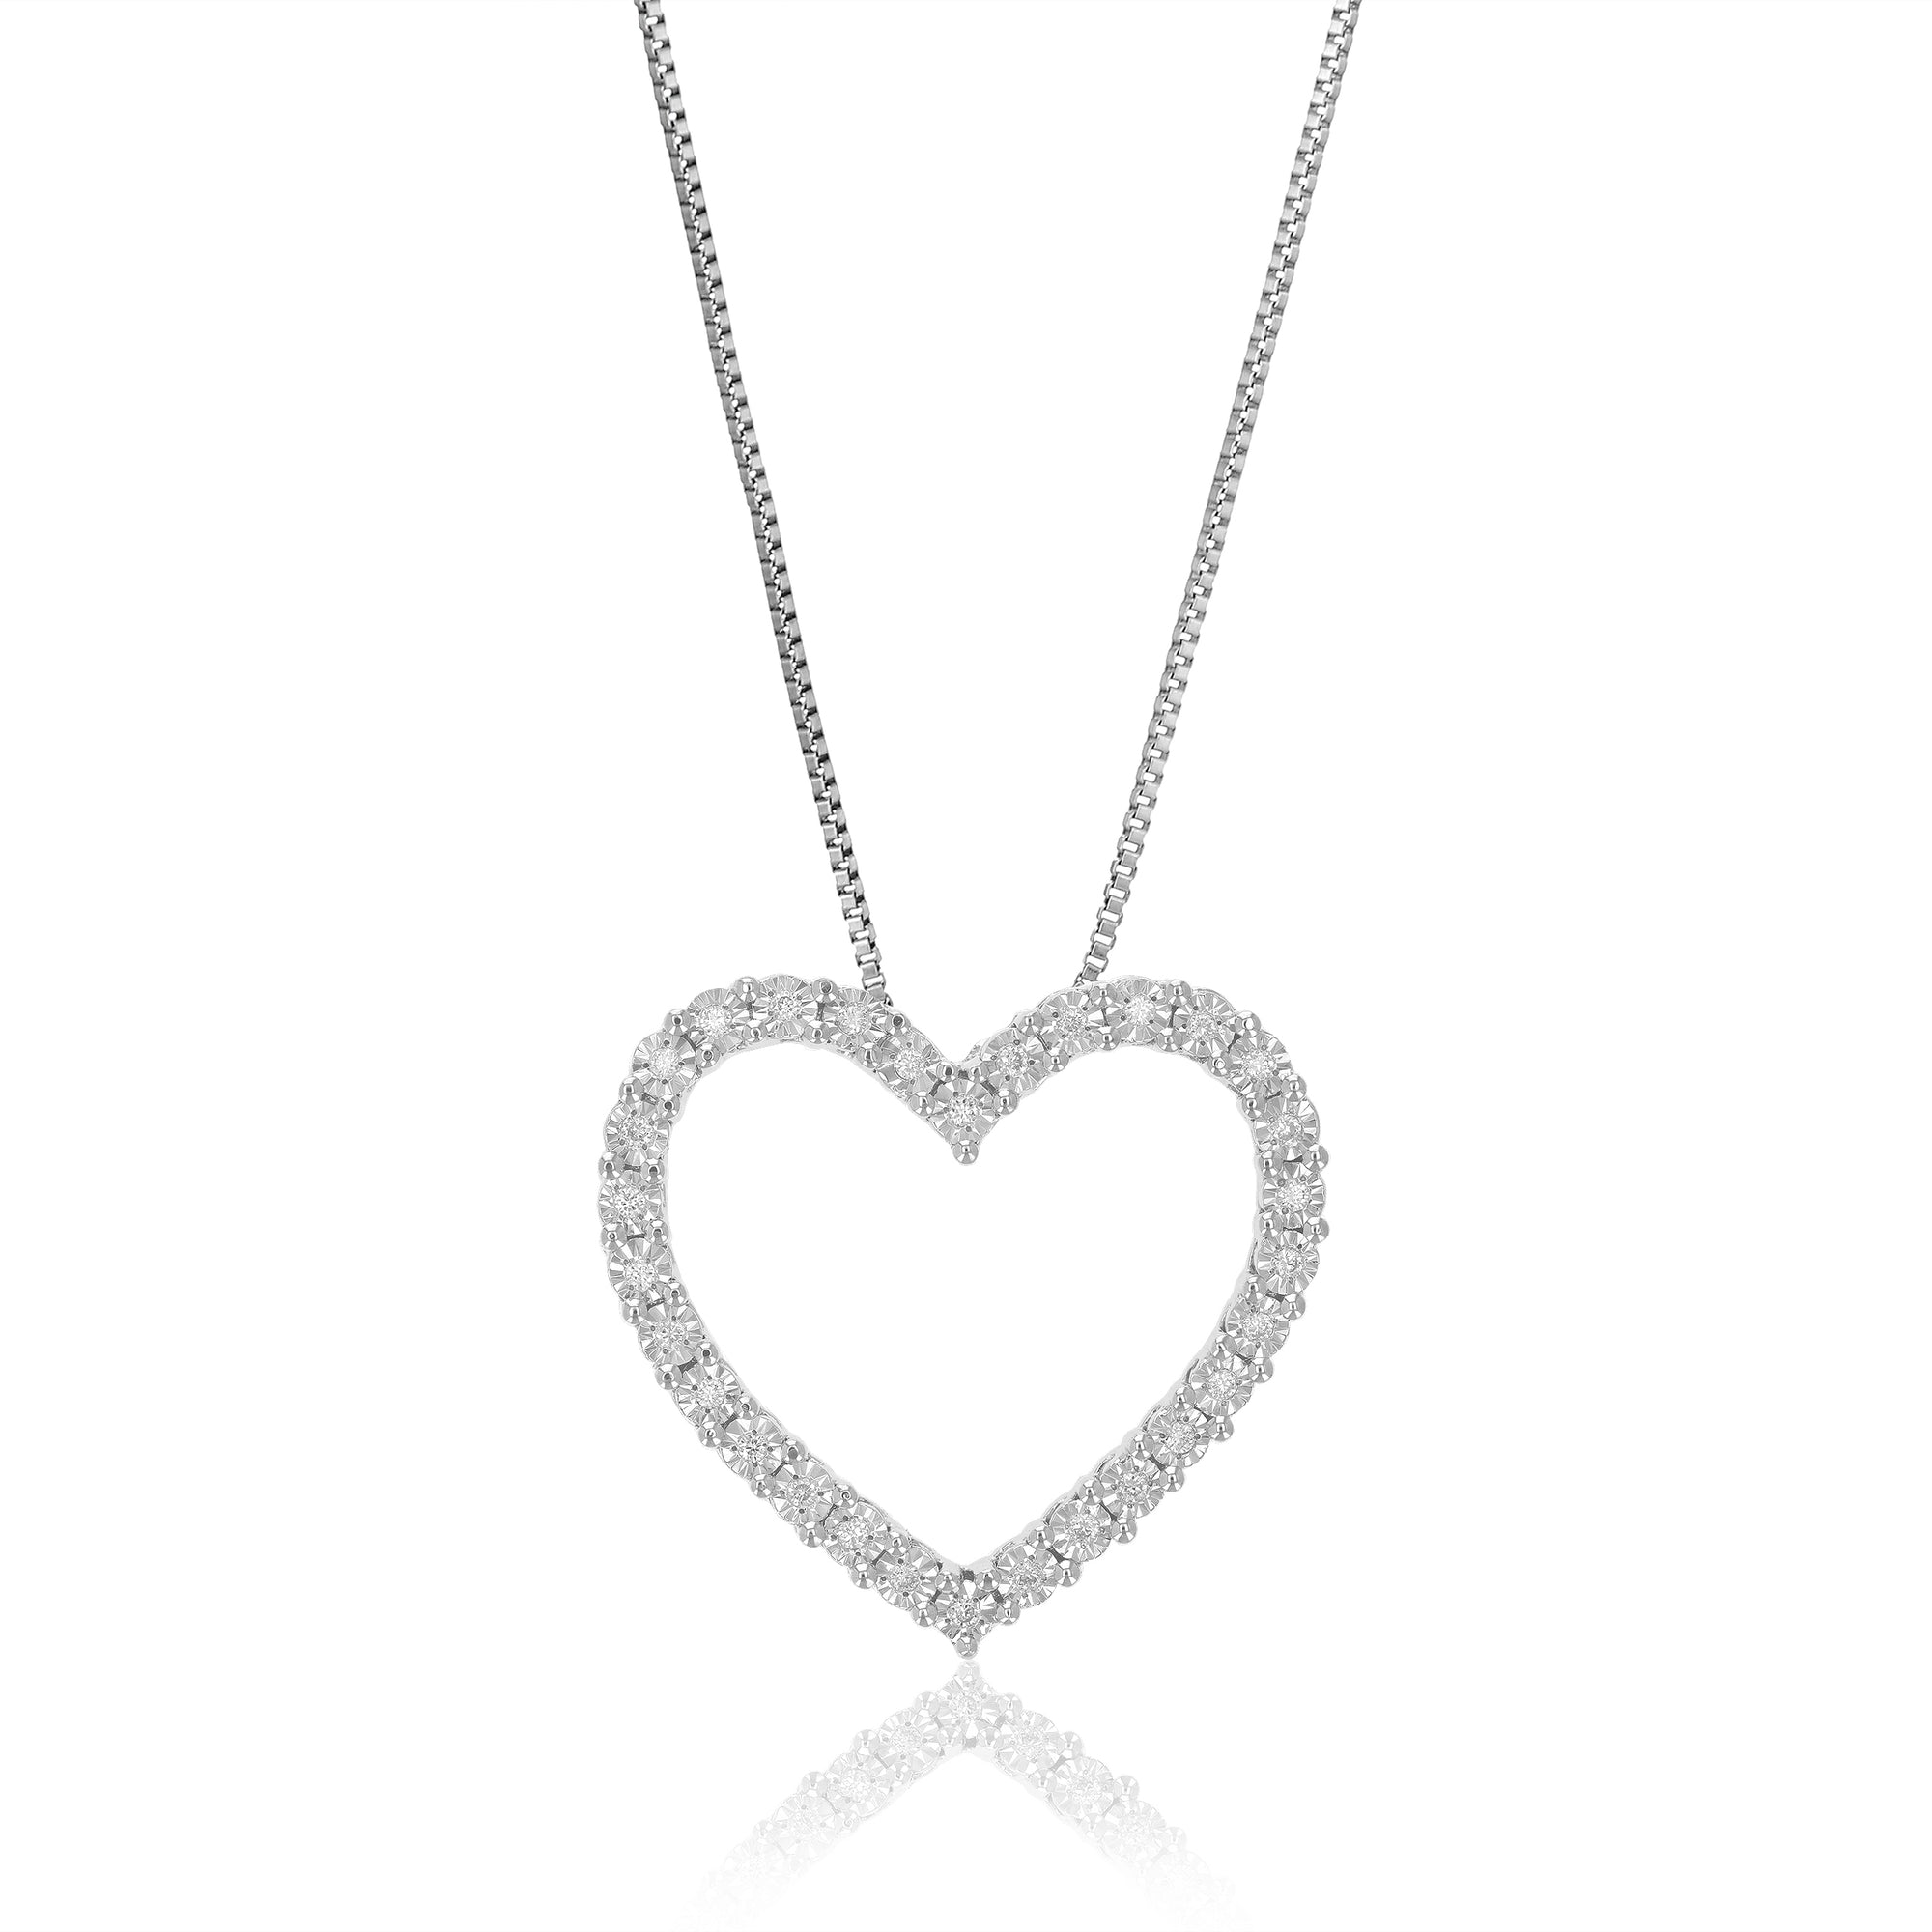 1/6 cttw Diamond Pendant Necklace for Women, Lab Grown Diamond Heart Pendant Necklace in .925 Sterling Silver with Chain, Size 3/4 Inch